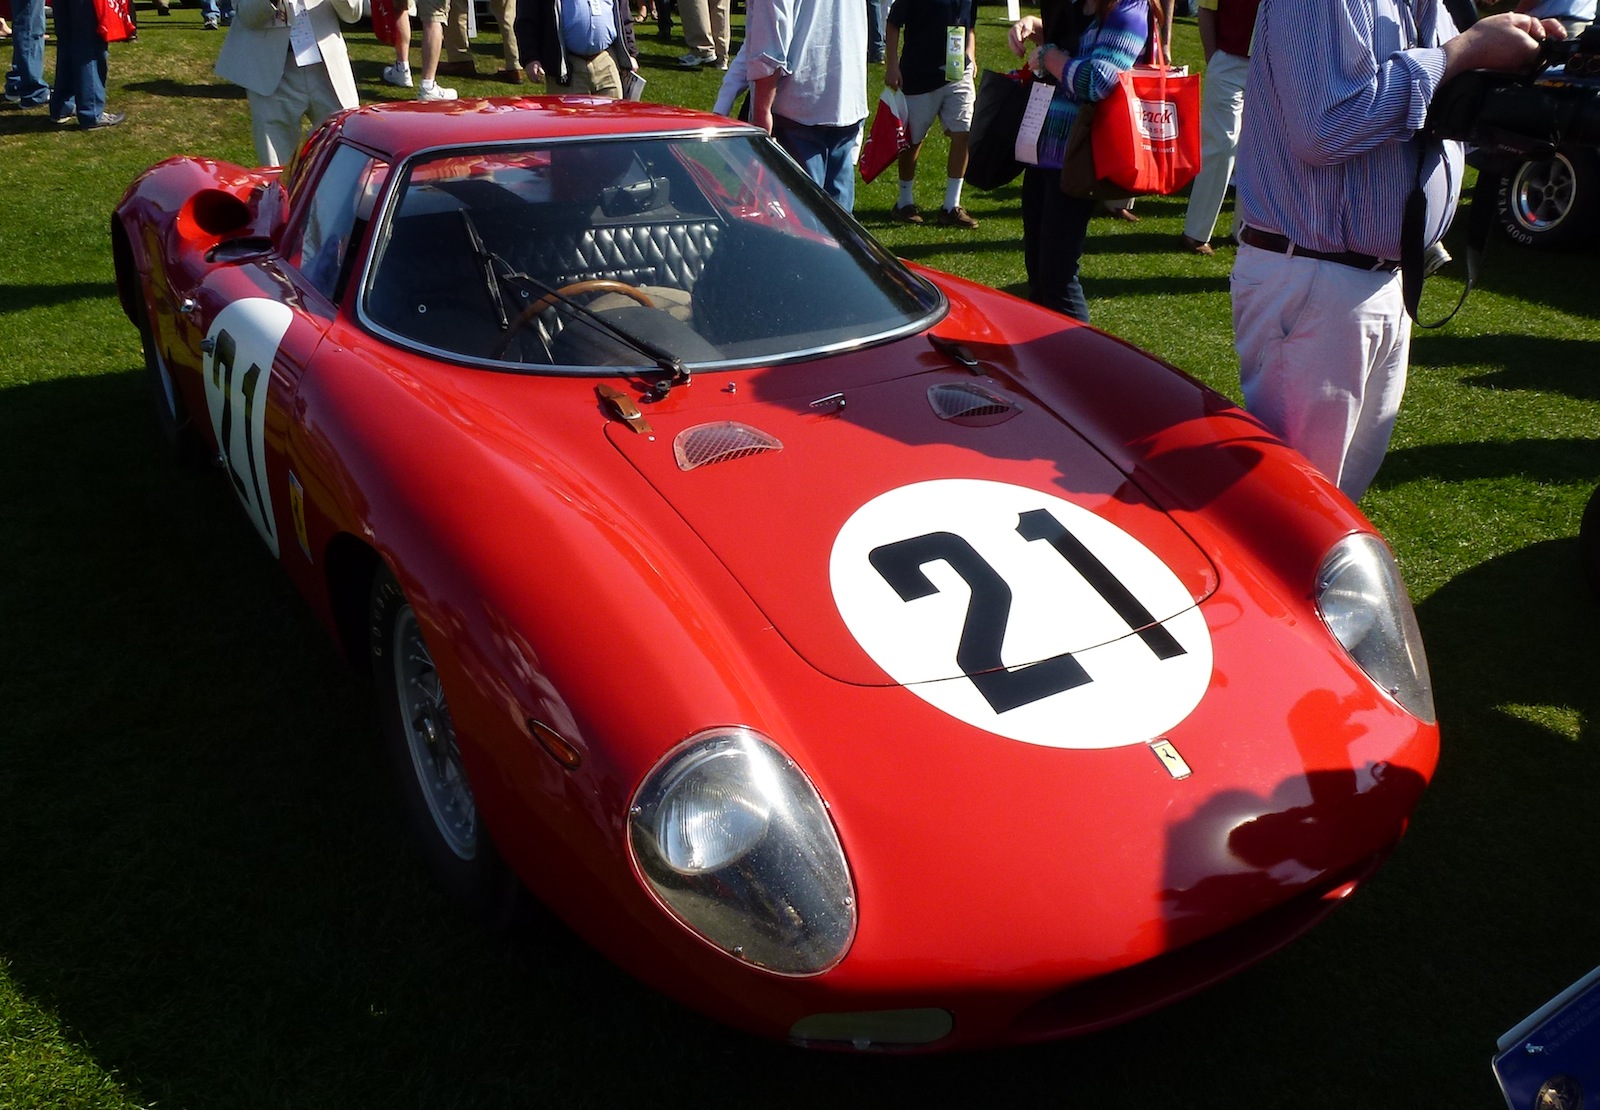 This Ferrari 250 LM Was the Last Ferrari To Win The 24 Hours of Le Mans